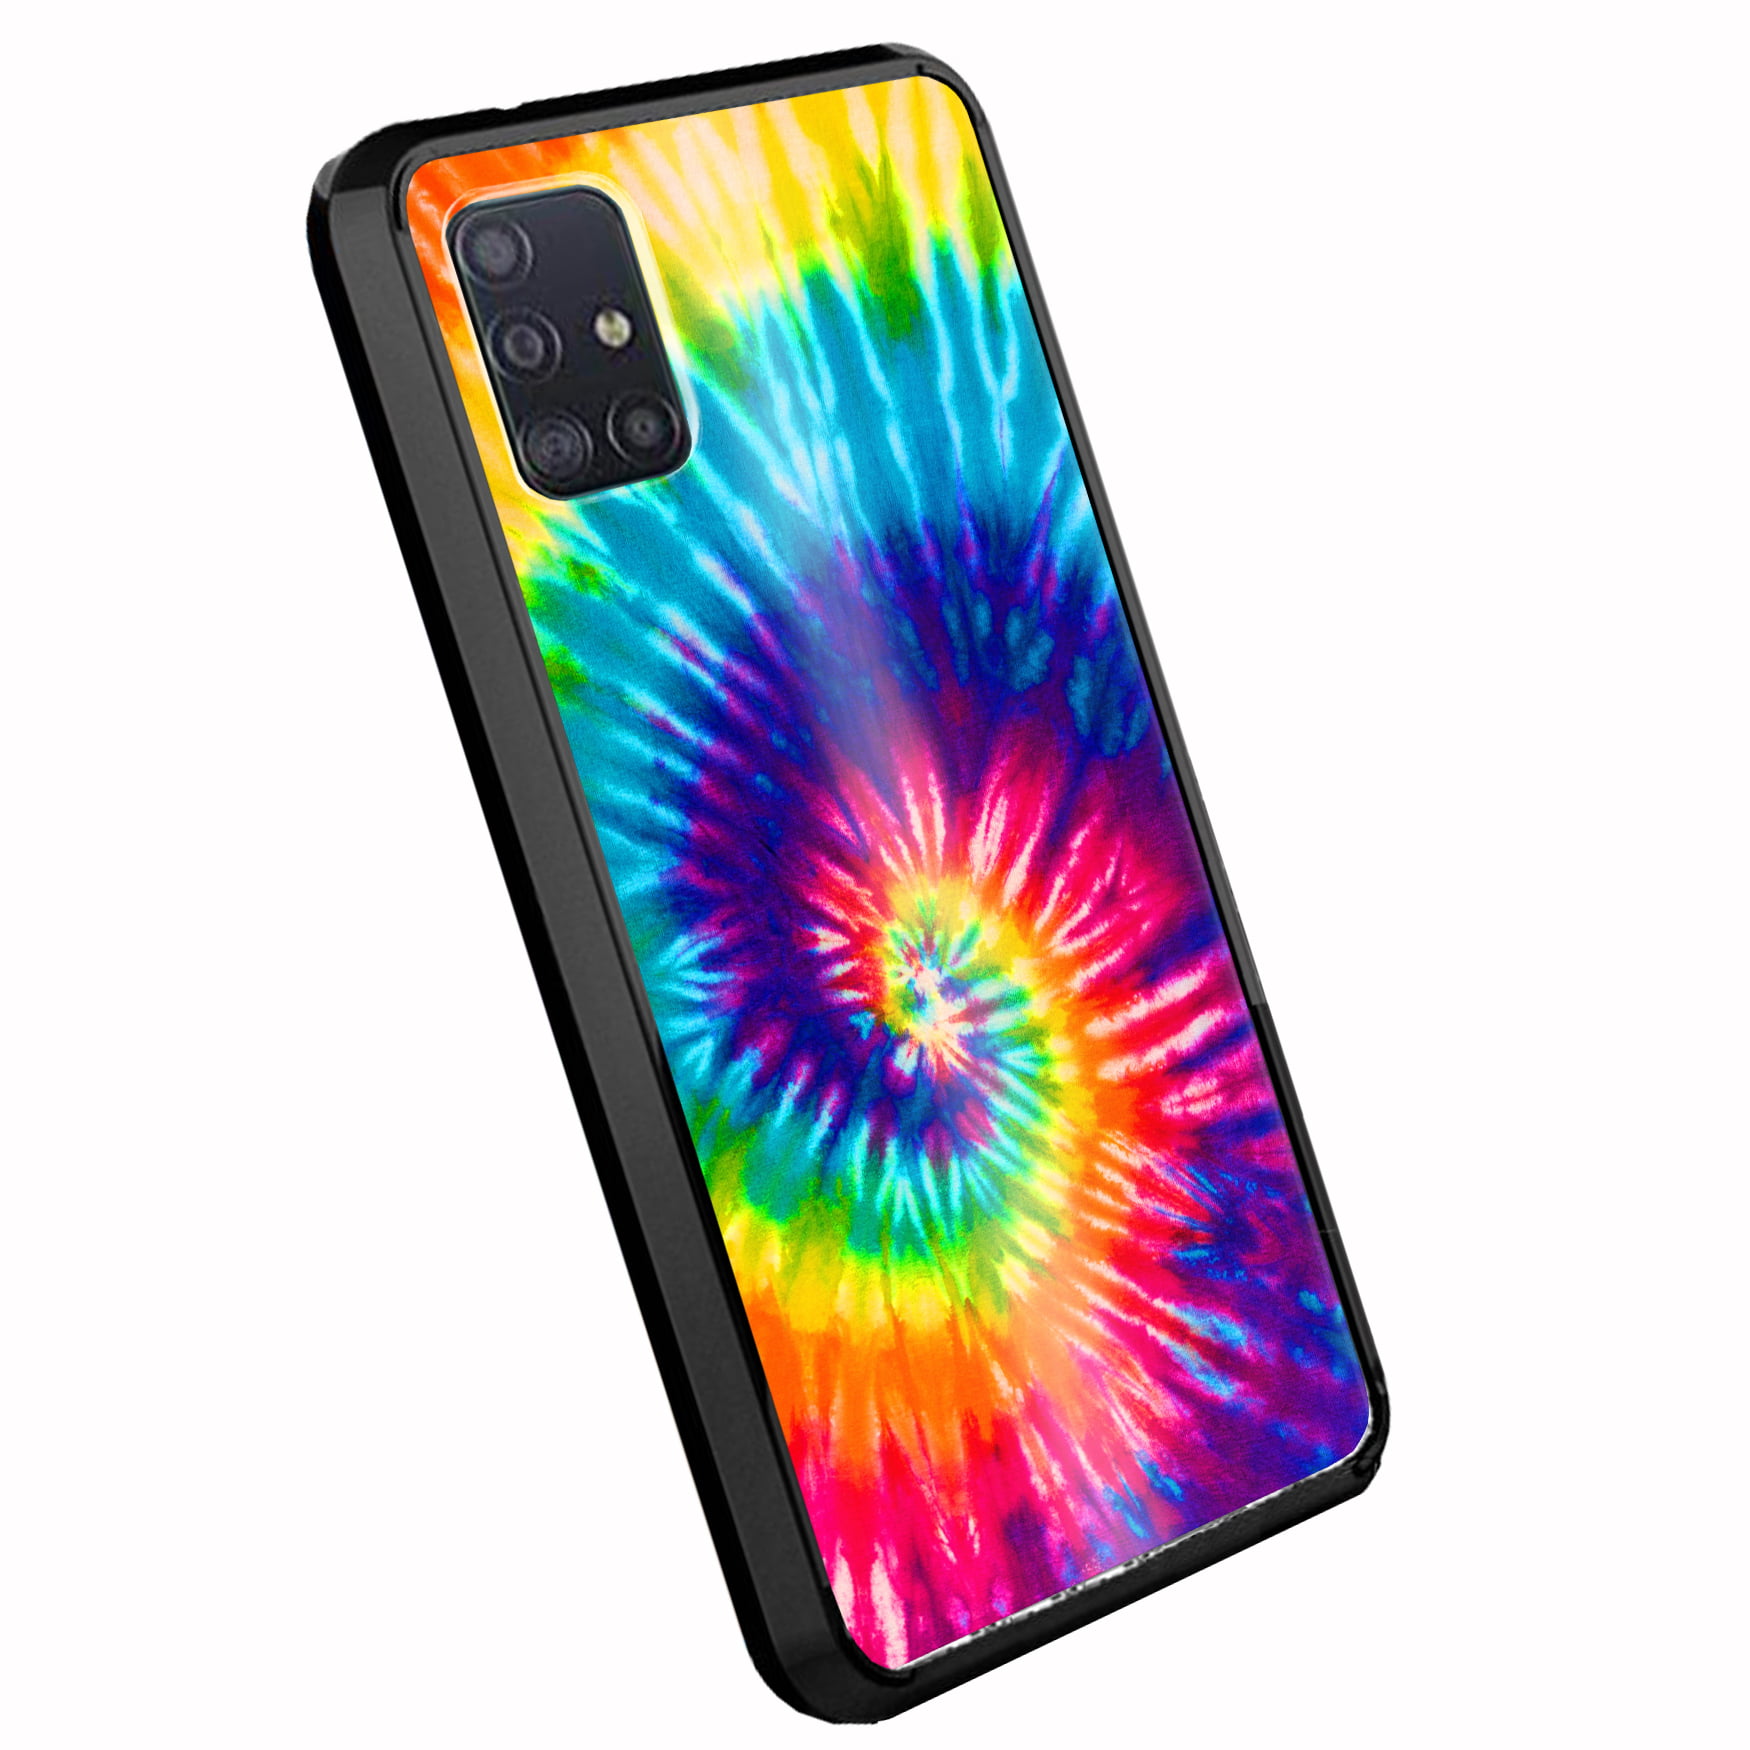 DALUX Ultra Slim PC-TPU Phone Case Compatible with Samsung Galaxy A51 4G (2019) - Tie Dye Swirl